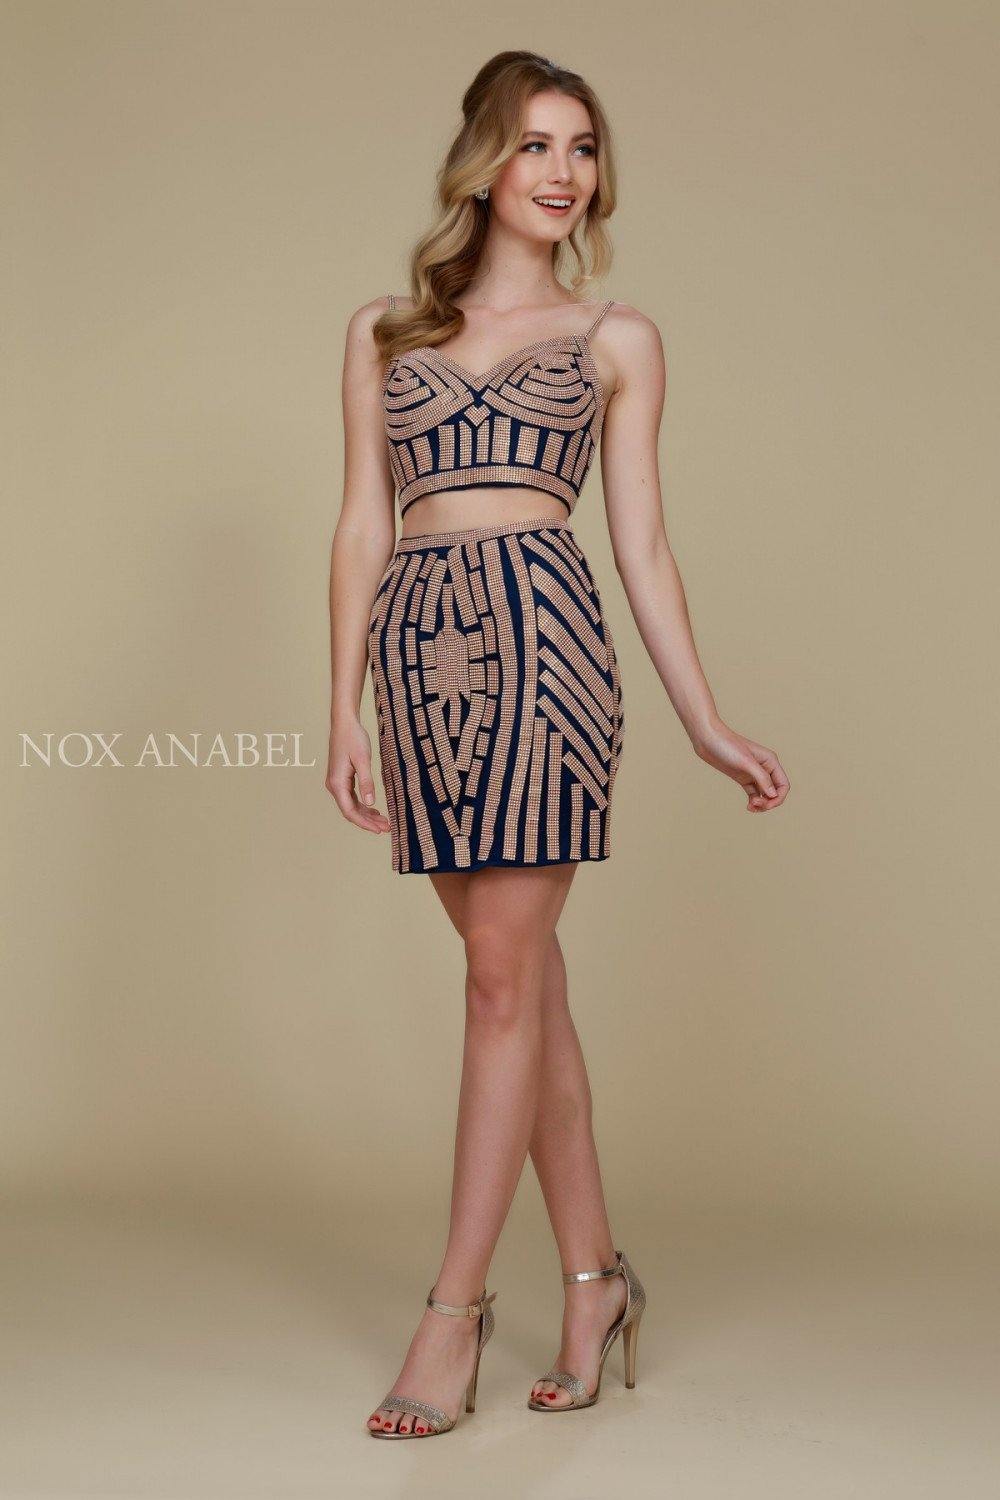 Short Two Piece Crop Top Prom Cocktail Dress - The Dress Outlet Nox Anabel